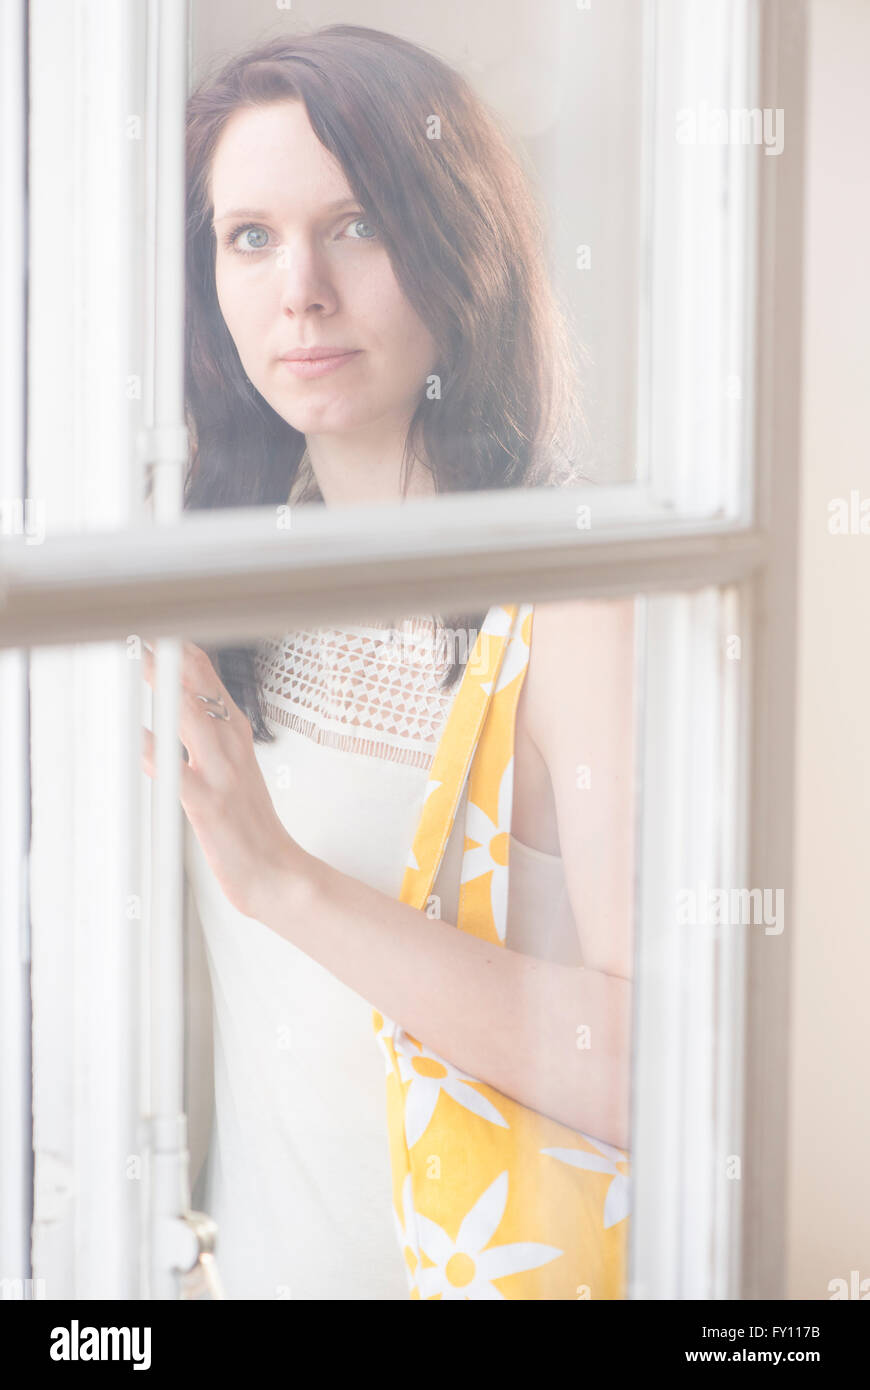 Woman standing by a window, looking at camera. Concept of sadness, waiting and anticipation. Lifestyle image of contemplation. Stock Photo